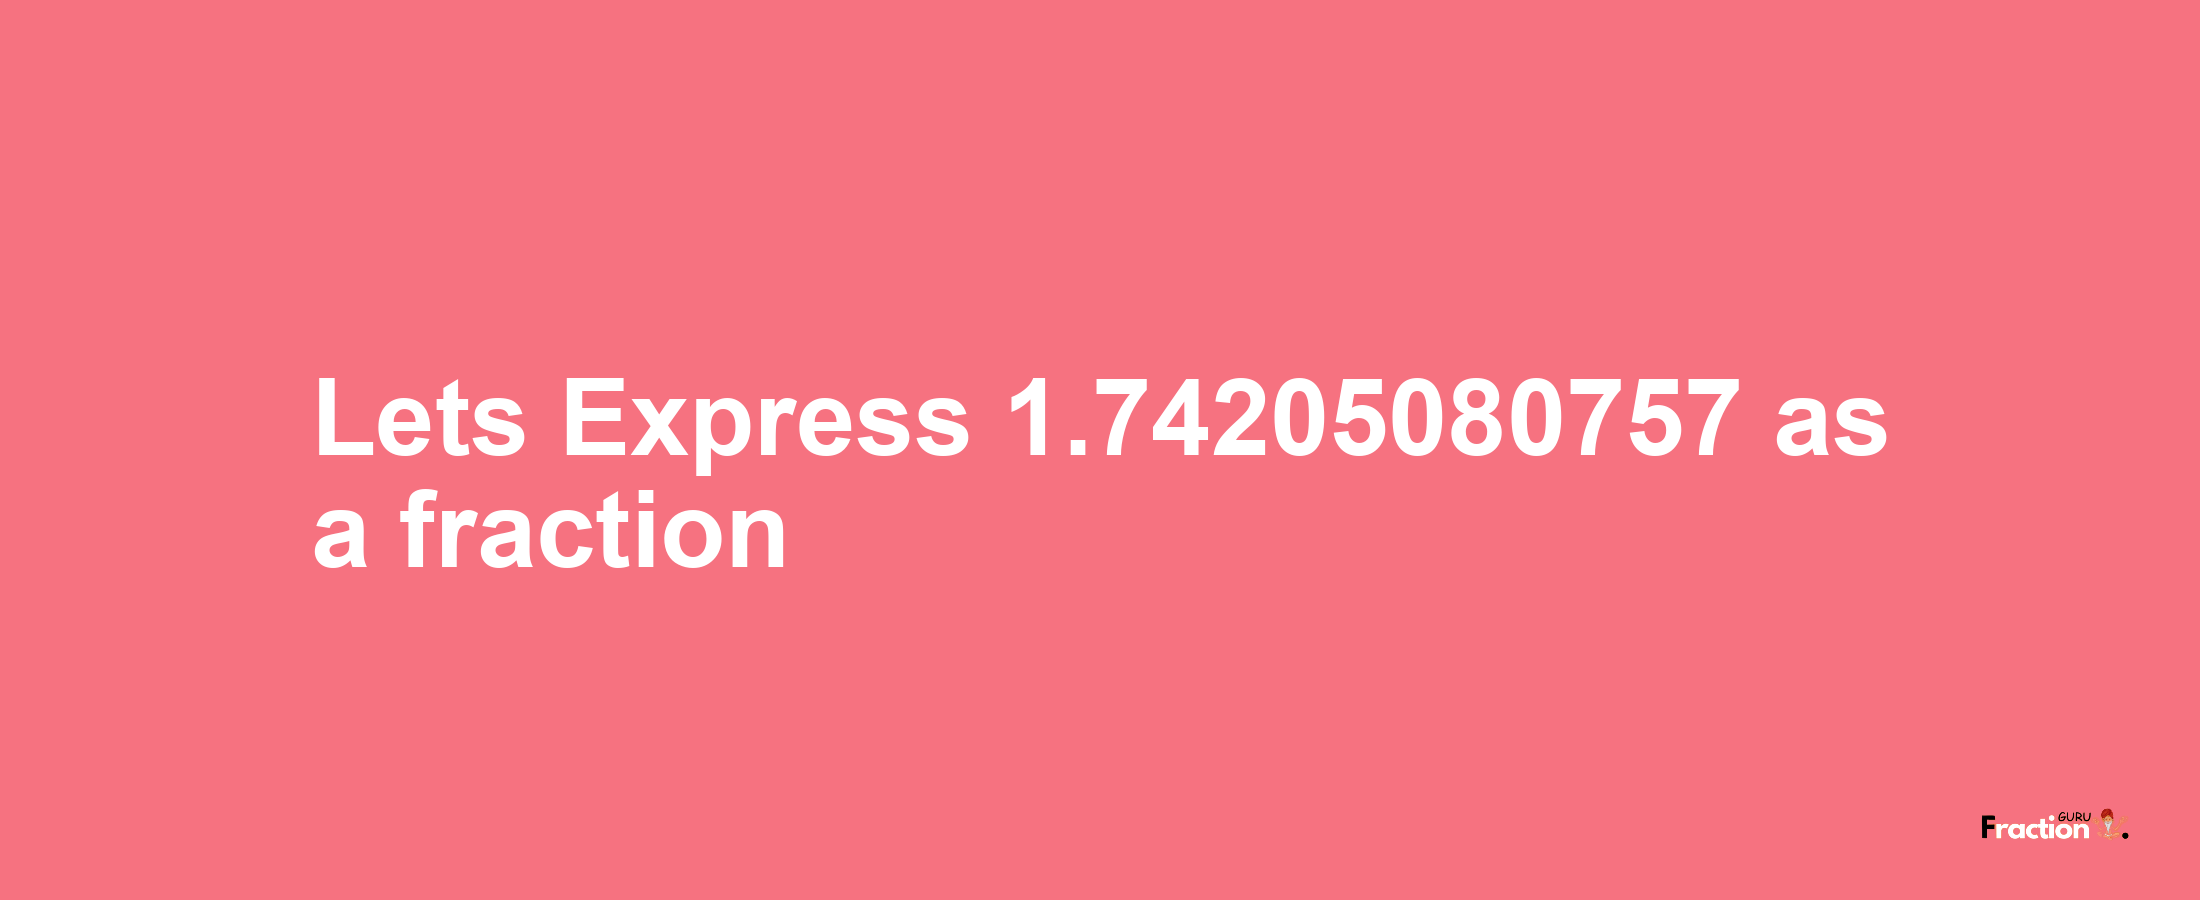 Lets Express 1.74205080757 as afraction